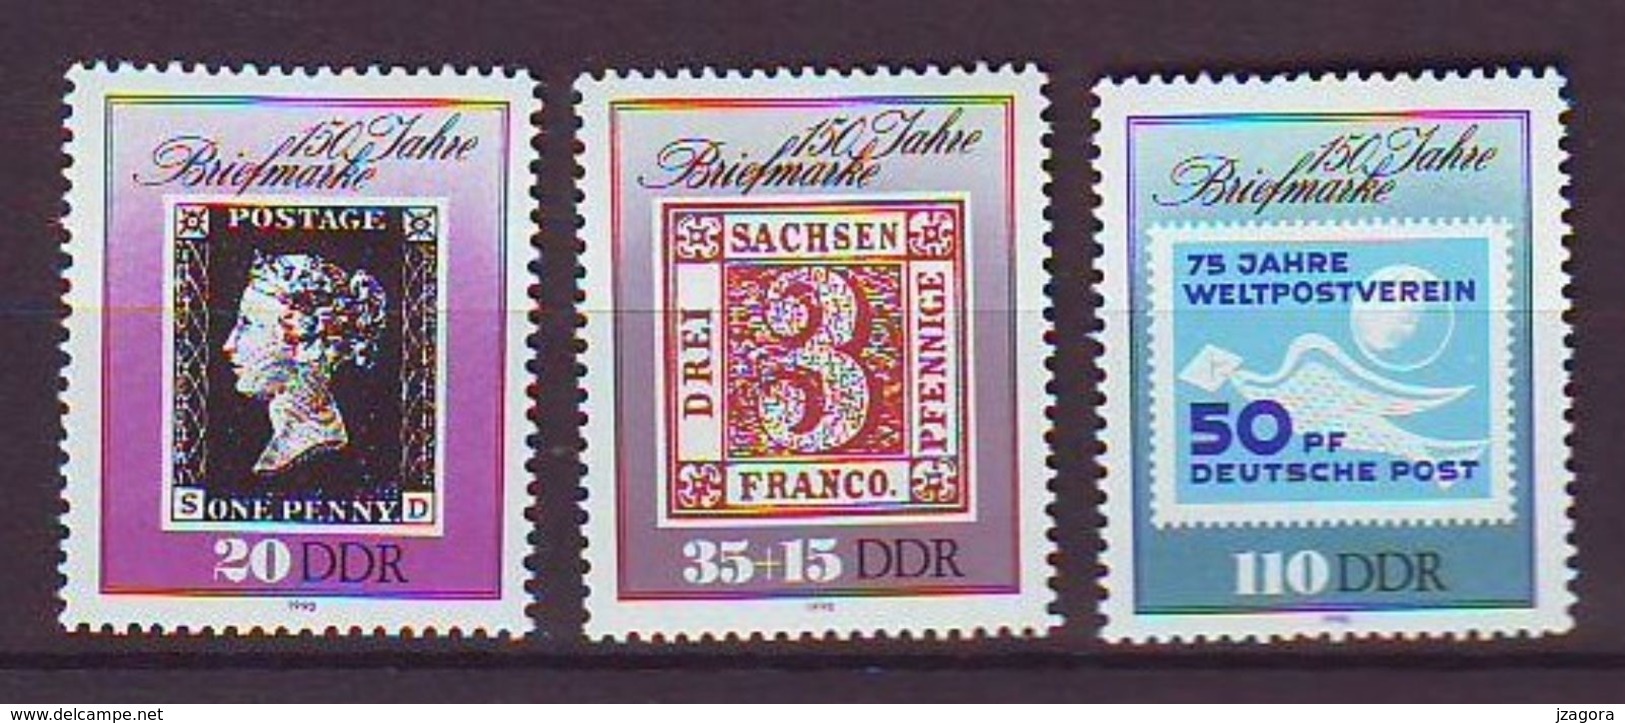 STAMP ON STAMPS  TIMBRE SUR LES TIMBRES DDR 1990 MNH Mi 3329-3331 - Stamps On Stamps